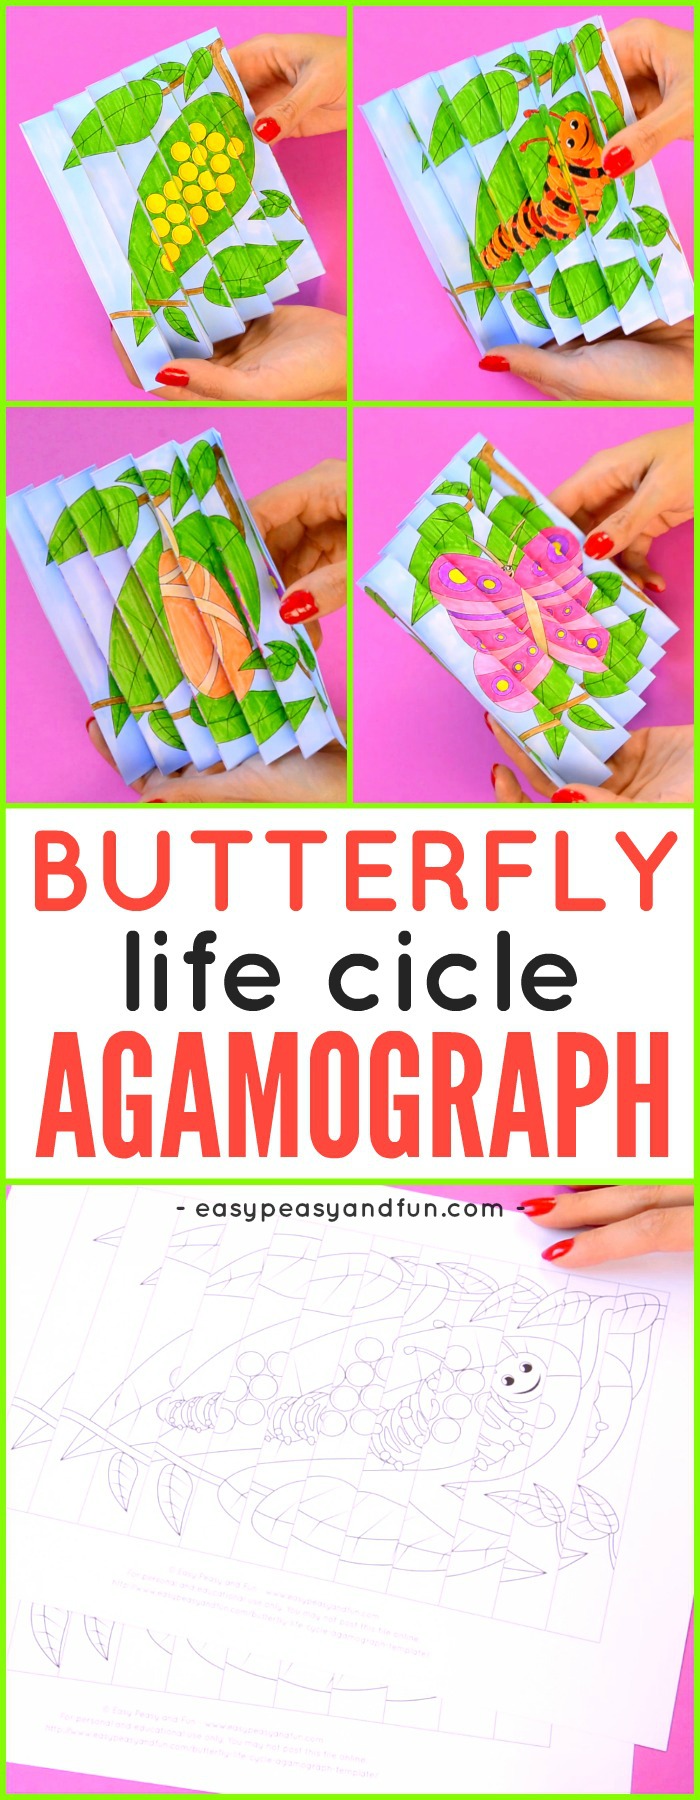 Printable Butterfly Life Cycle Agamograph Template for Kids.